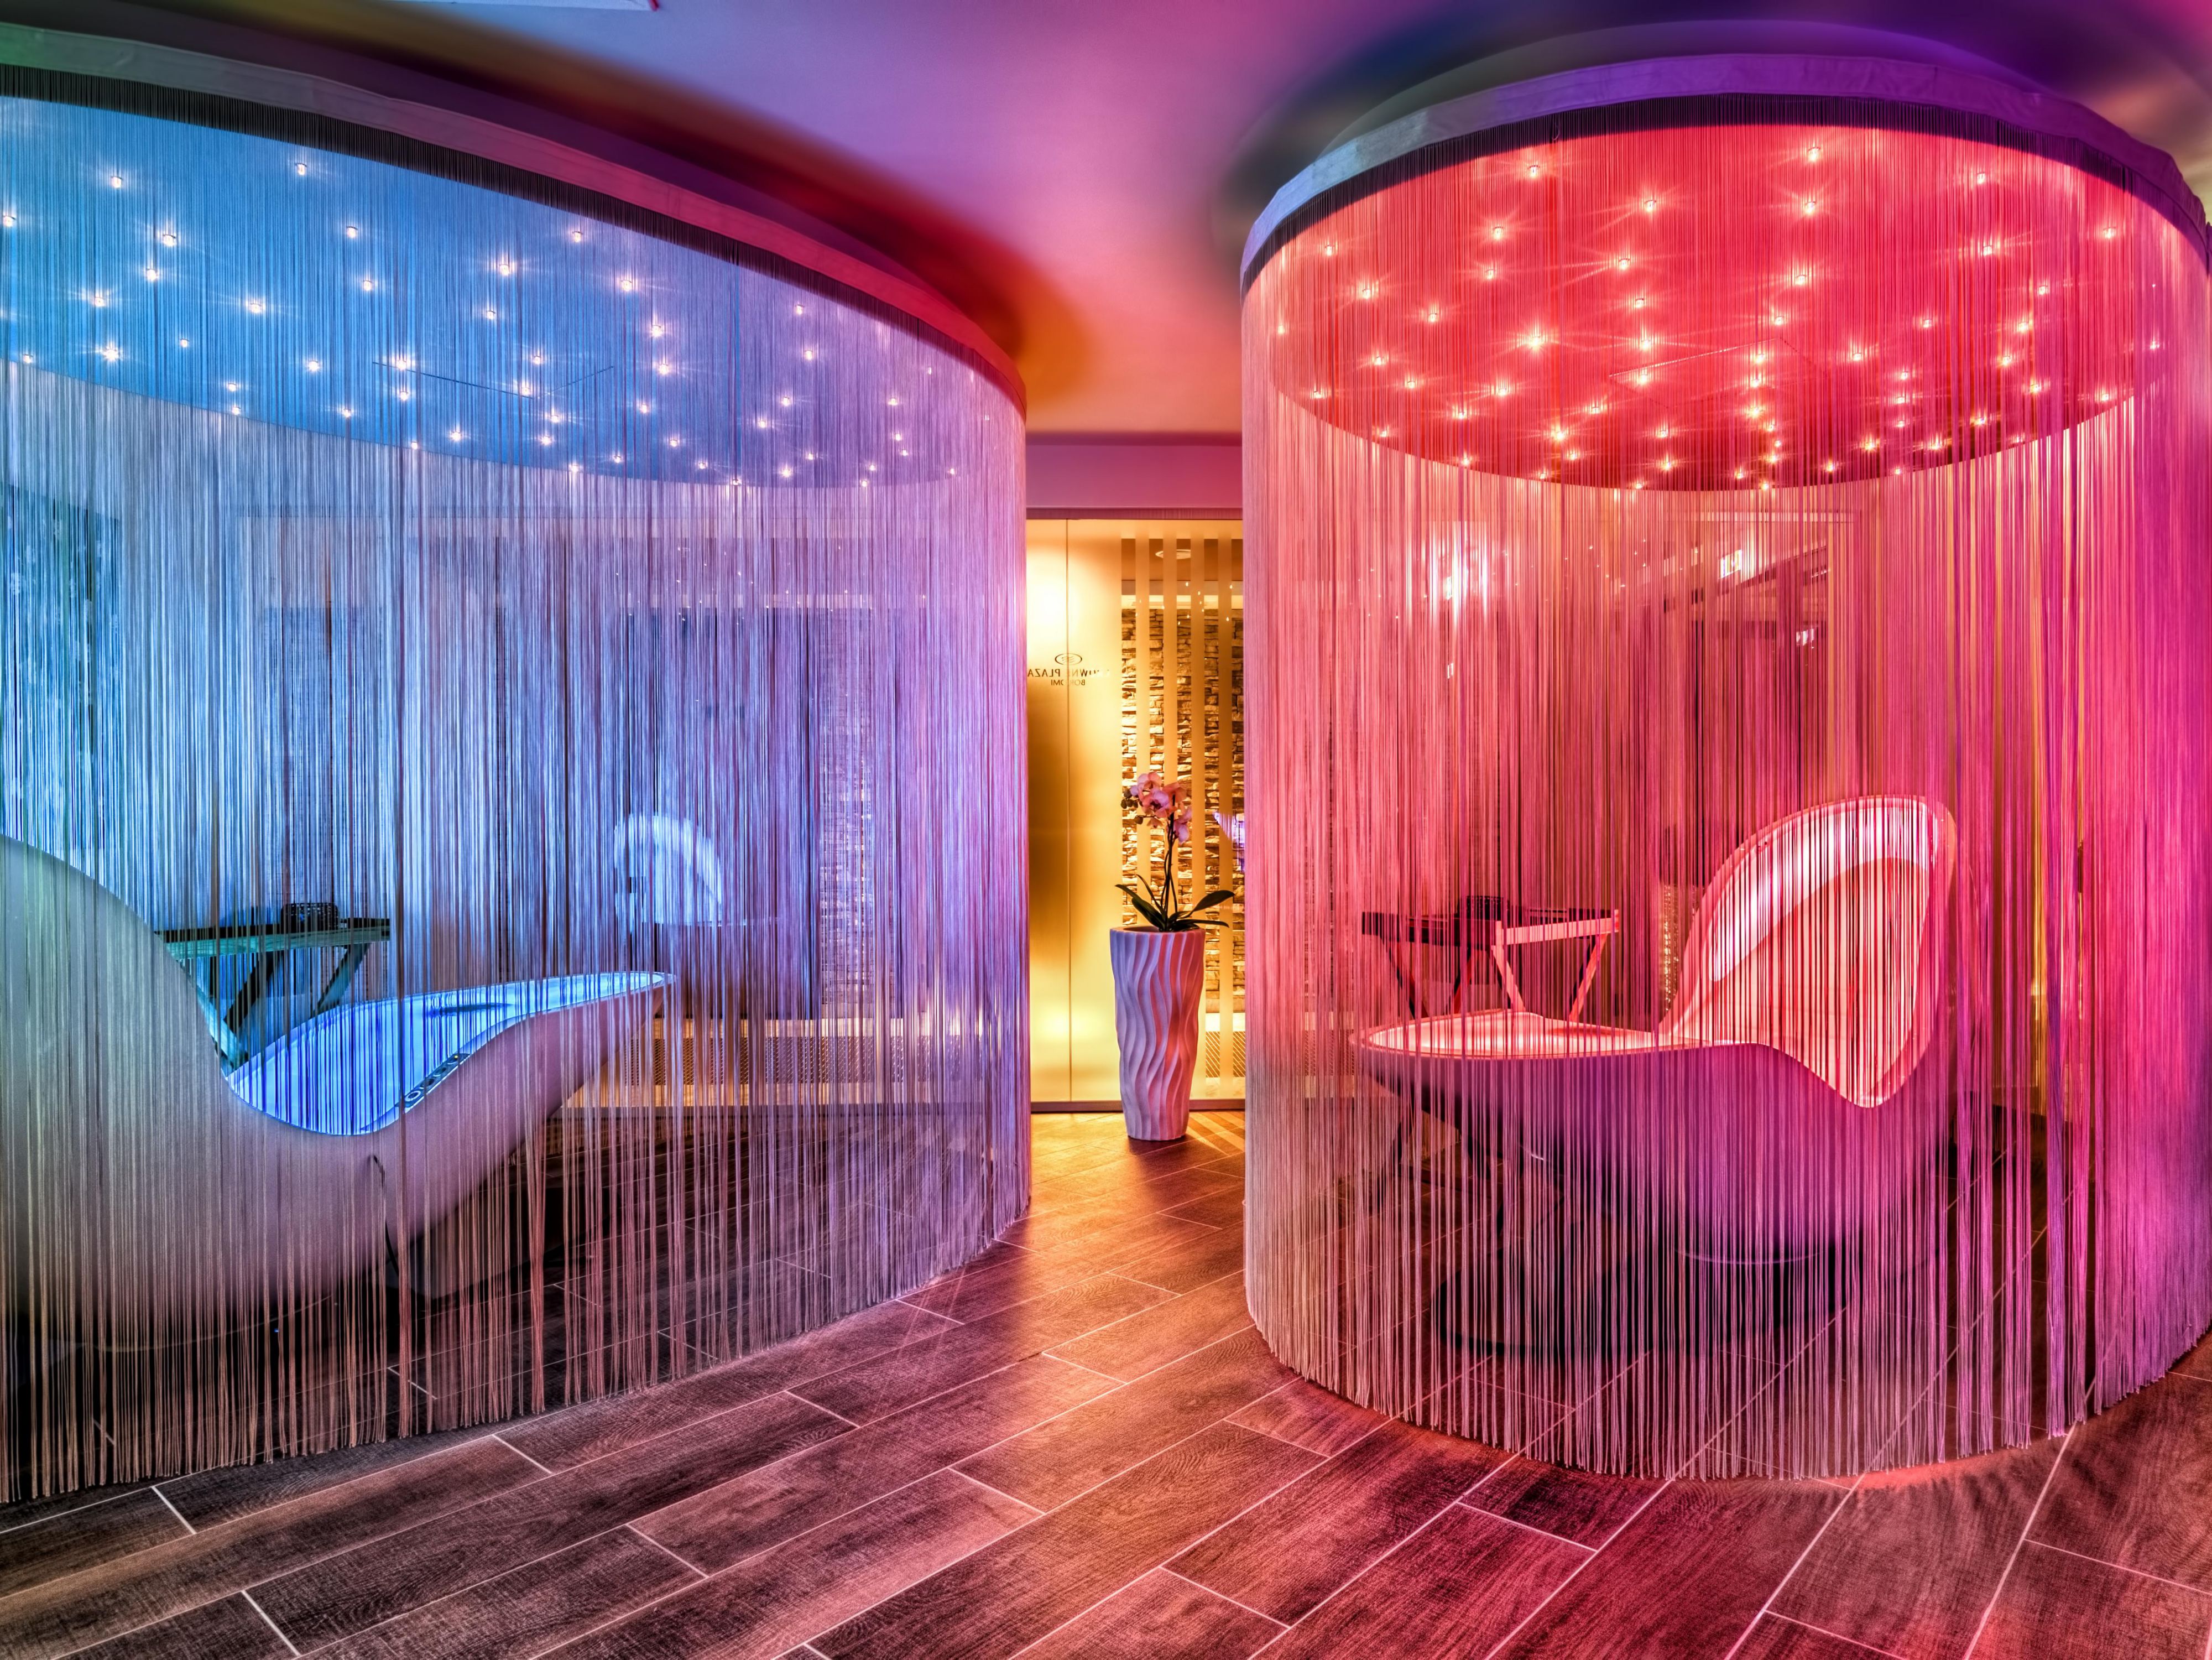 Exclusive Wellness & Spa Centre (2.400 sqm) offers leisure facilities like a swimming pool, saunas, steam rooms, and different relaxing areas, as well as an array of SPA treatments to satisfy the most discerning tastes and needs.